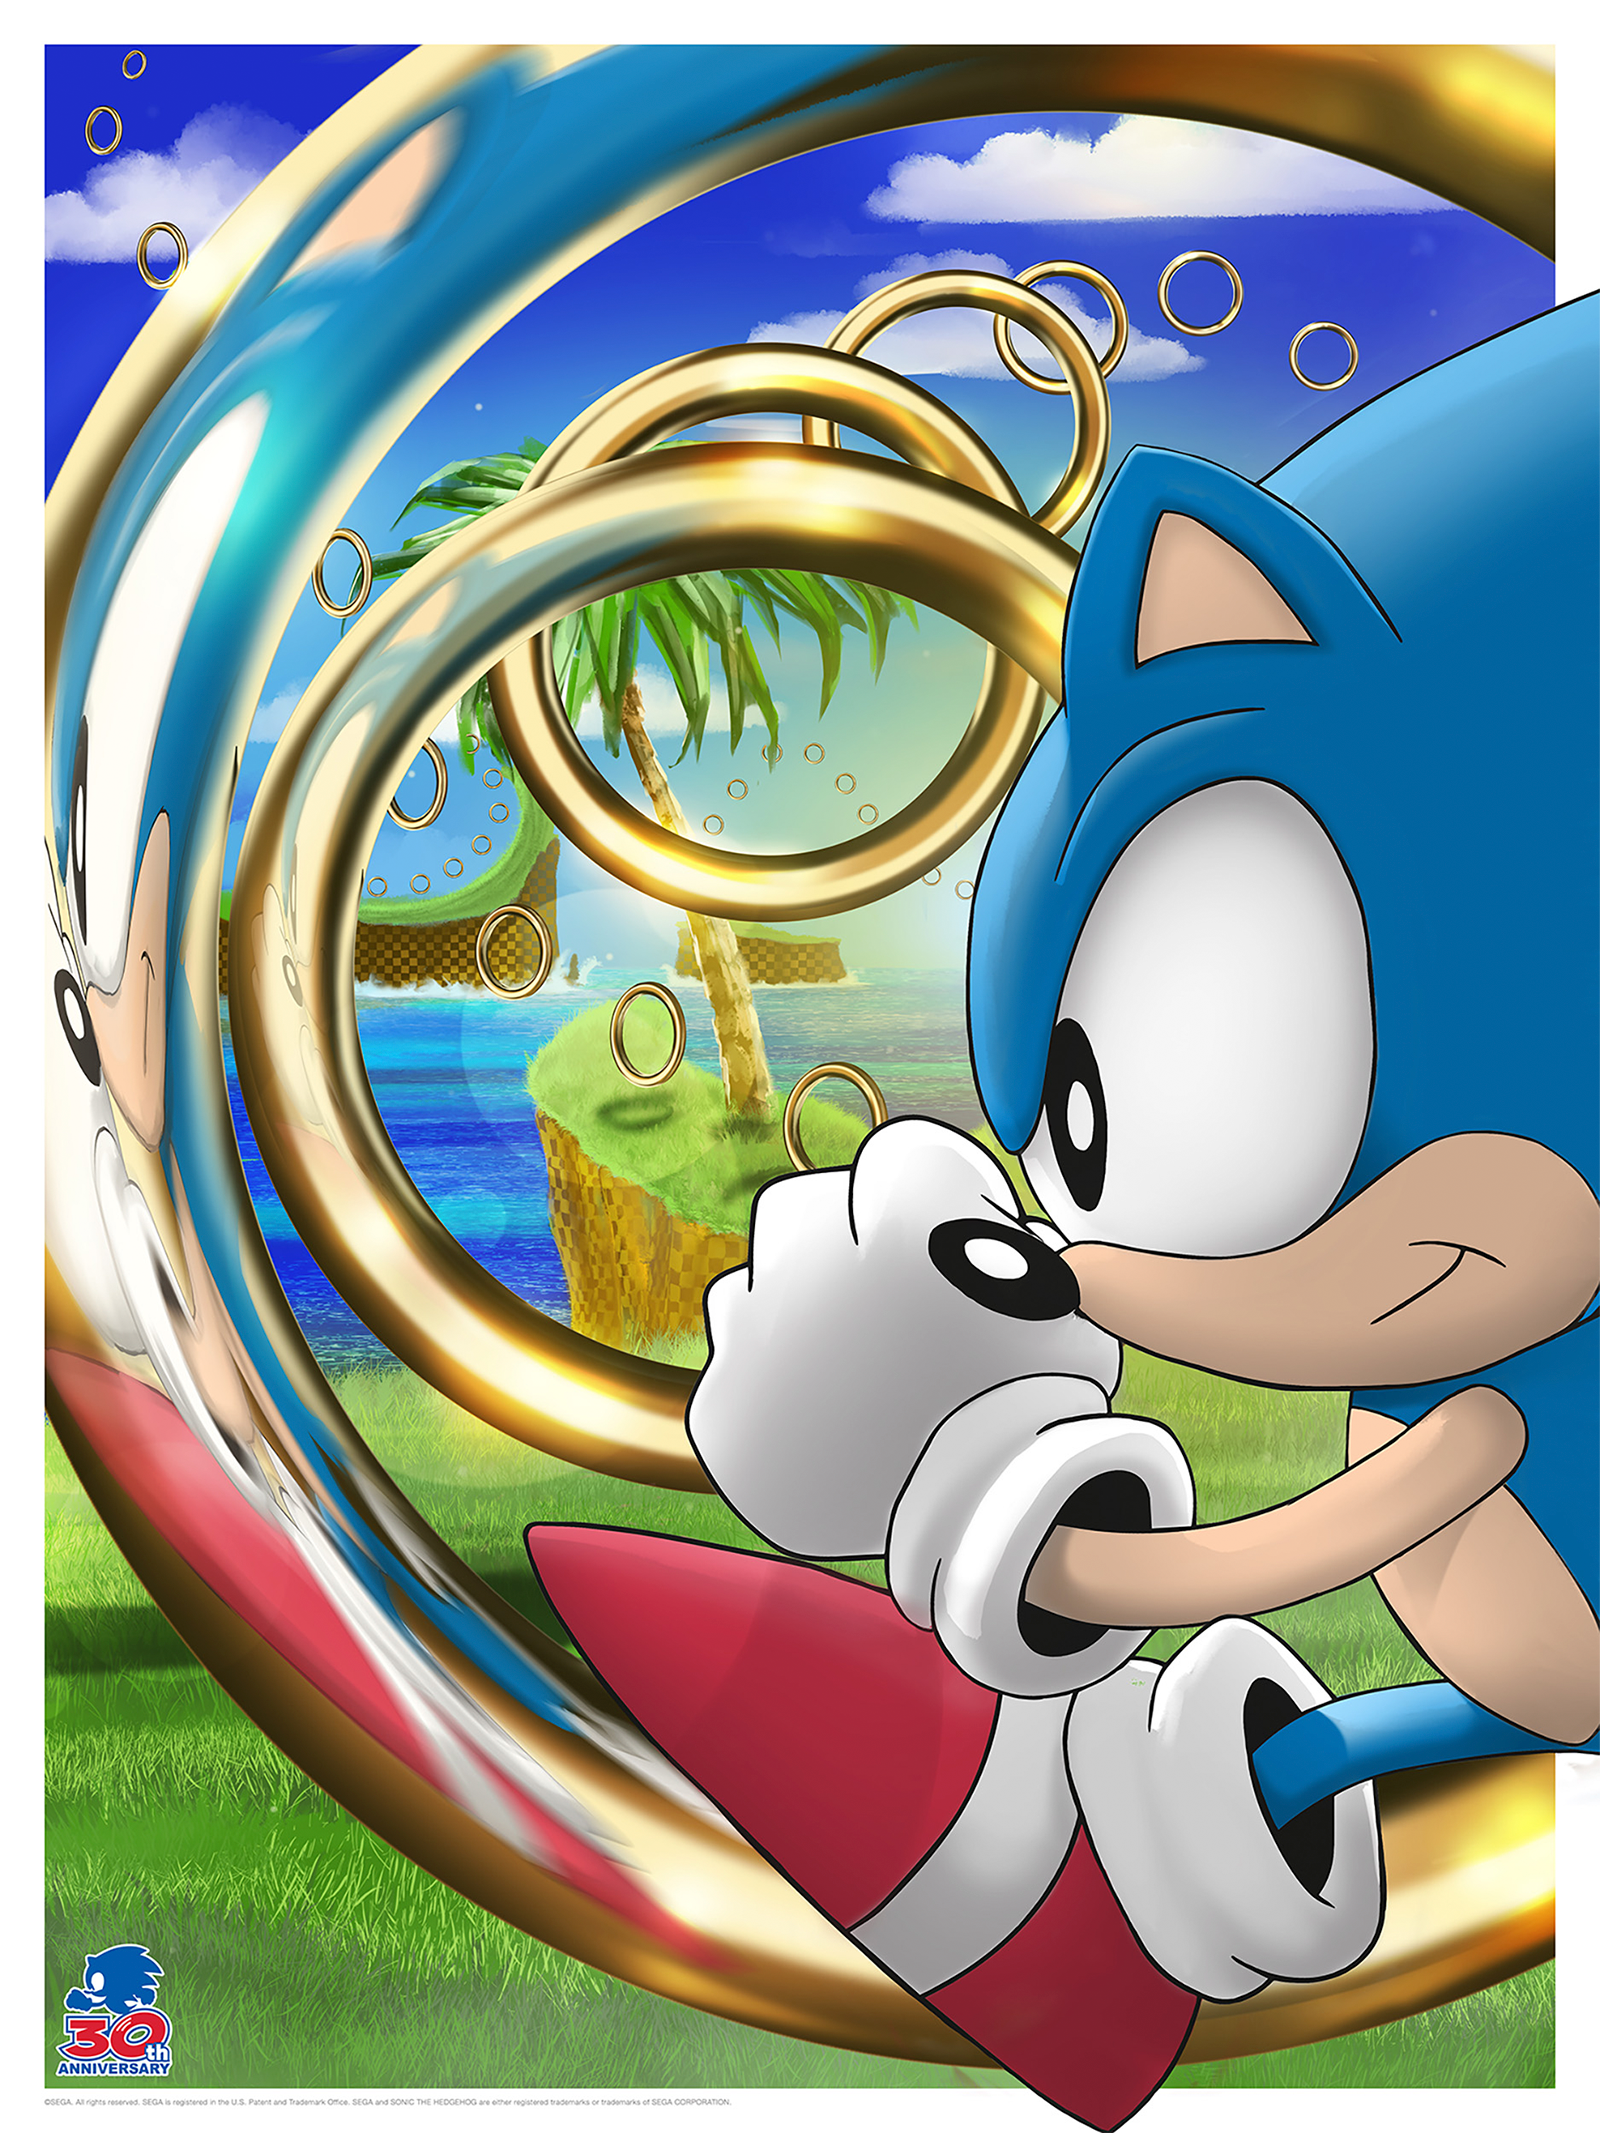 sonic the hedgehog 3 super edition first year anniversary by